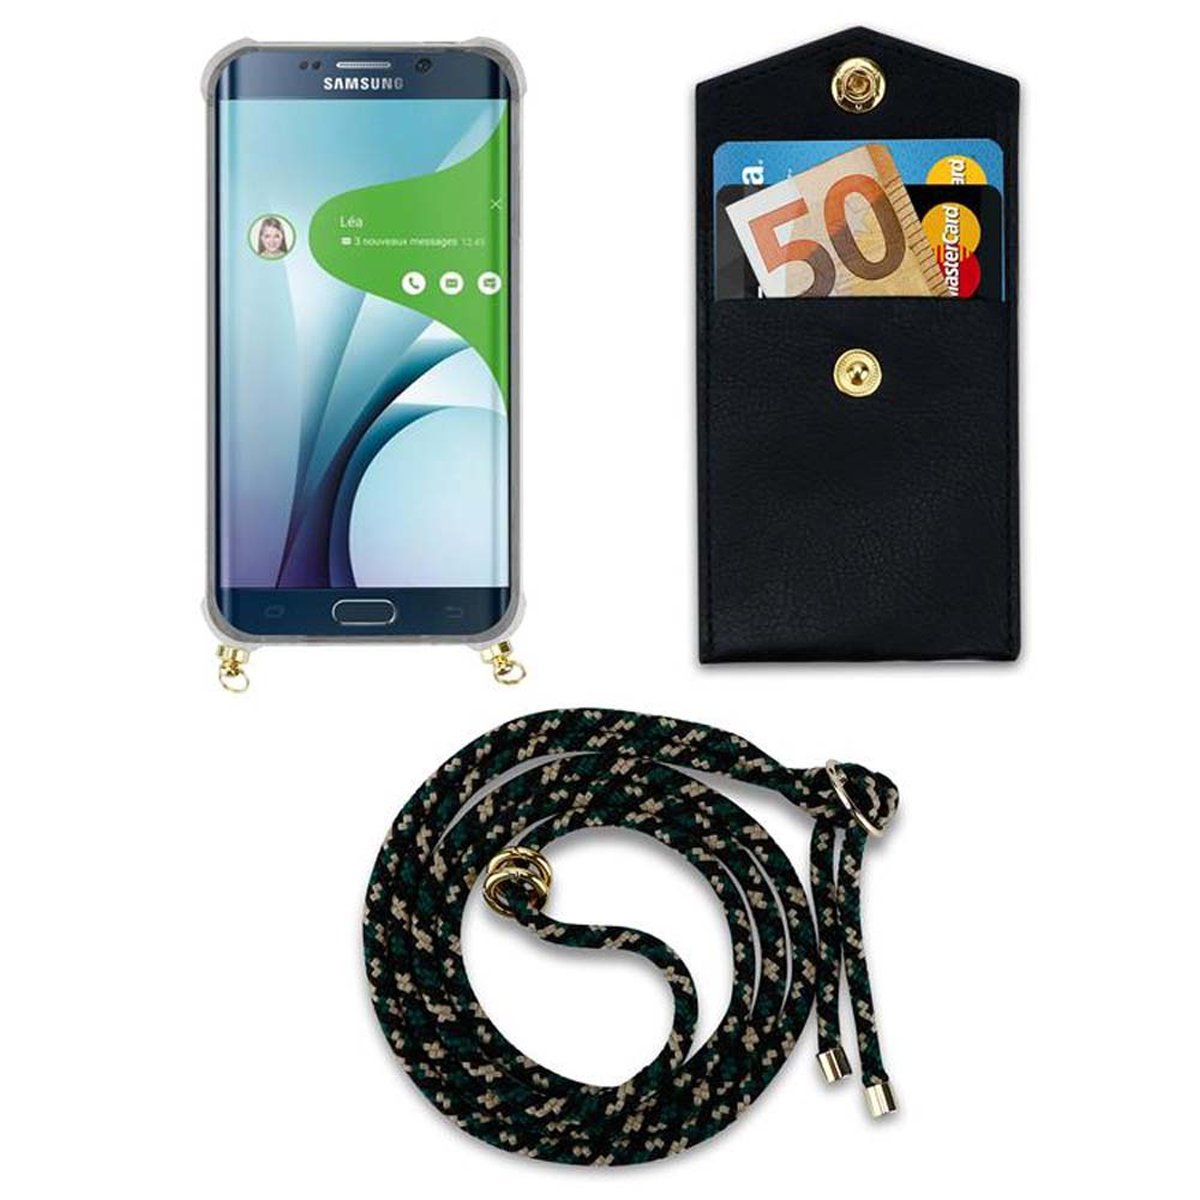 abnehmbarer Gold S6 Kordel Ringen, Galaxy Samsung, Kette mit Hülle, Band Handy CADORABO Backcover, CAMOUFLAGE EDGE, und